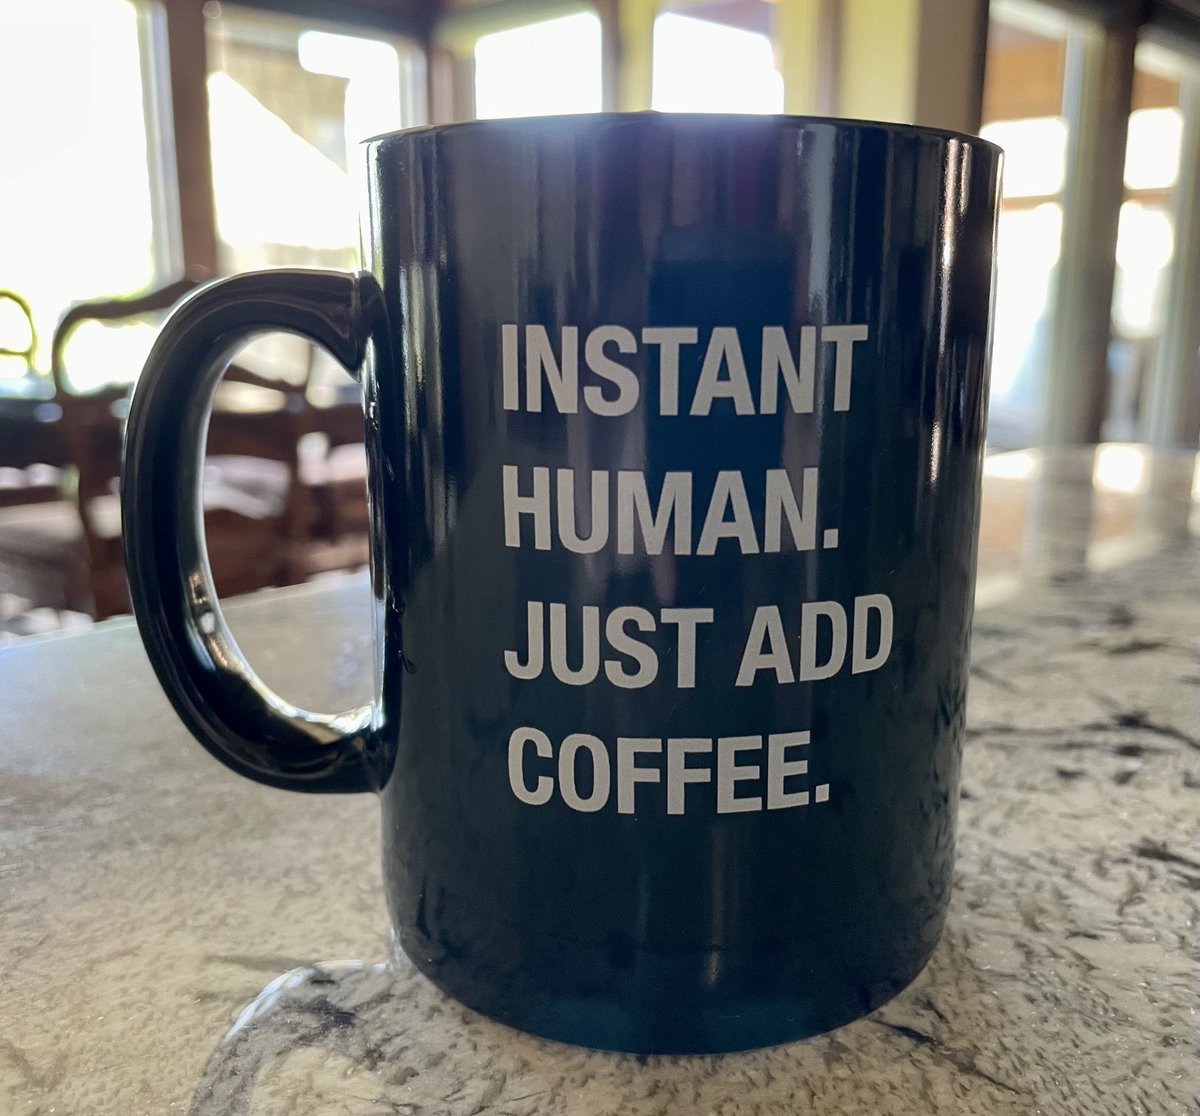 Drinking from my favorite coffee mug. Who else feels this way? I’m getting ready to work on my #WIP. #writingcommunity #writer #lovetowrite